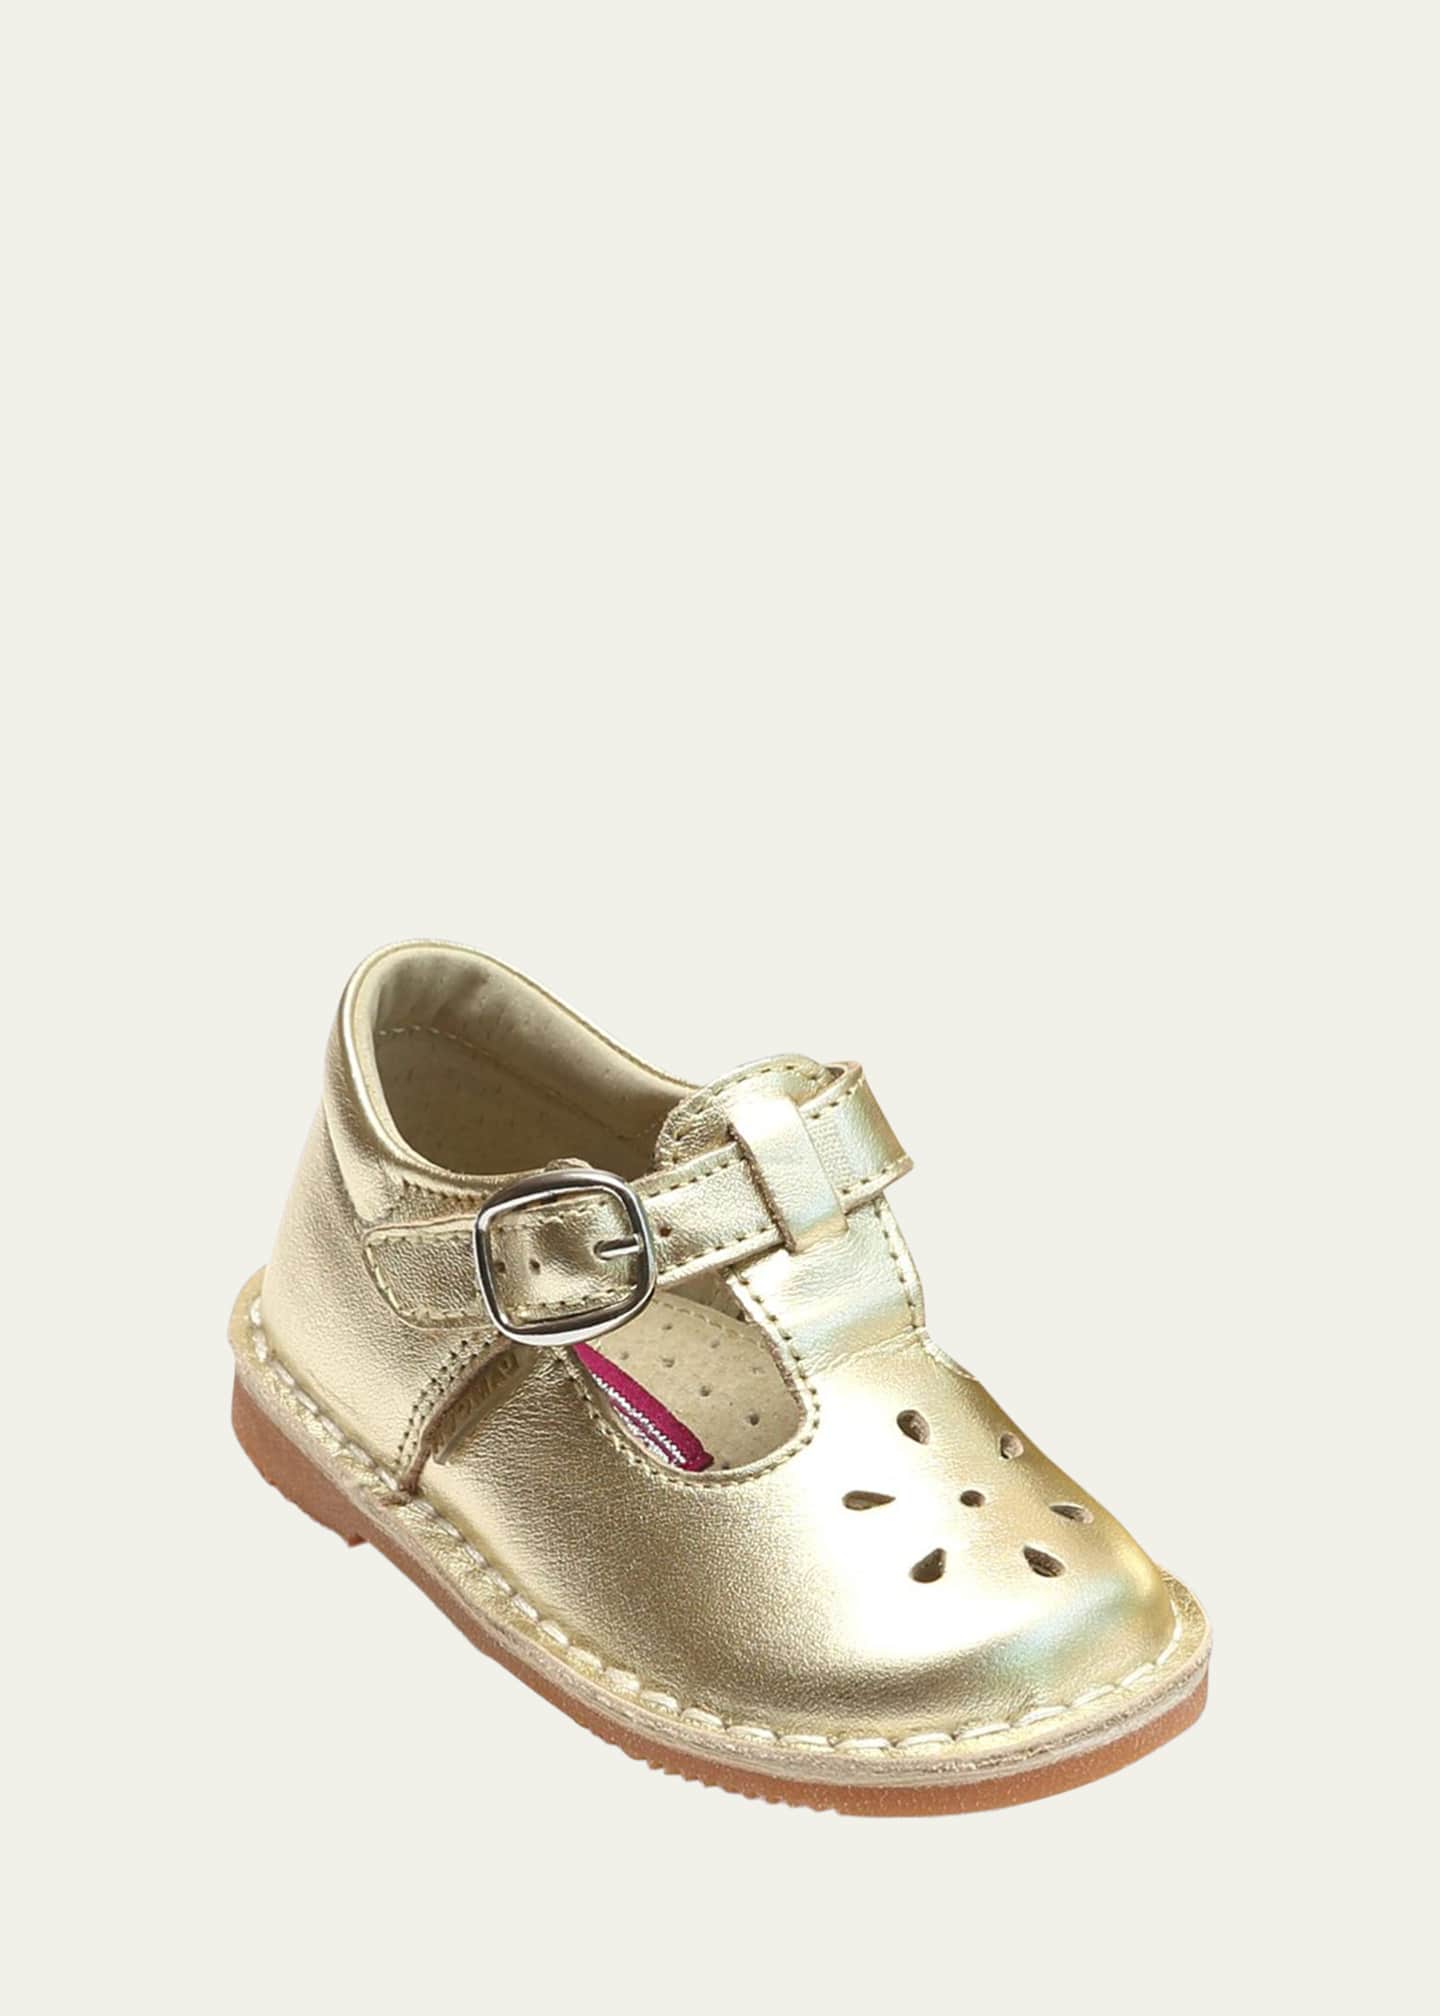 L'Amour Shoes Girl's Joy Metallic Leather Cutout T-Strap Mary Jane ...